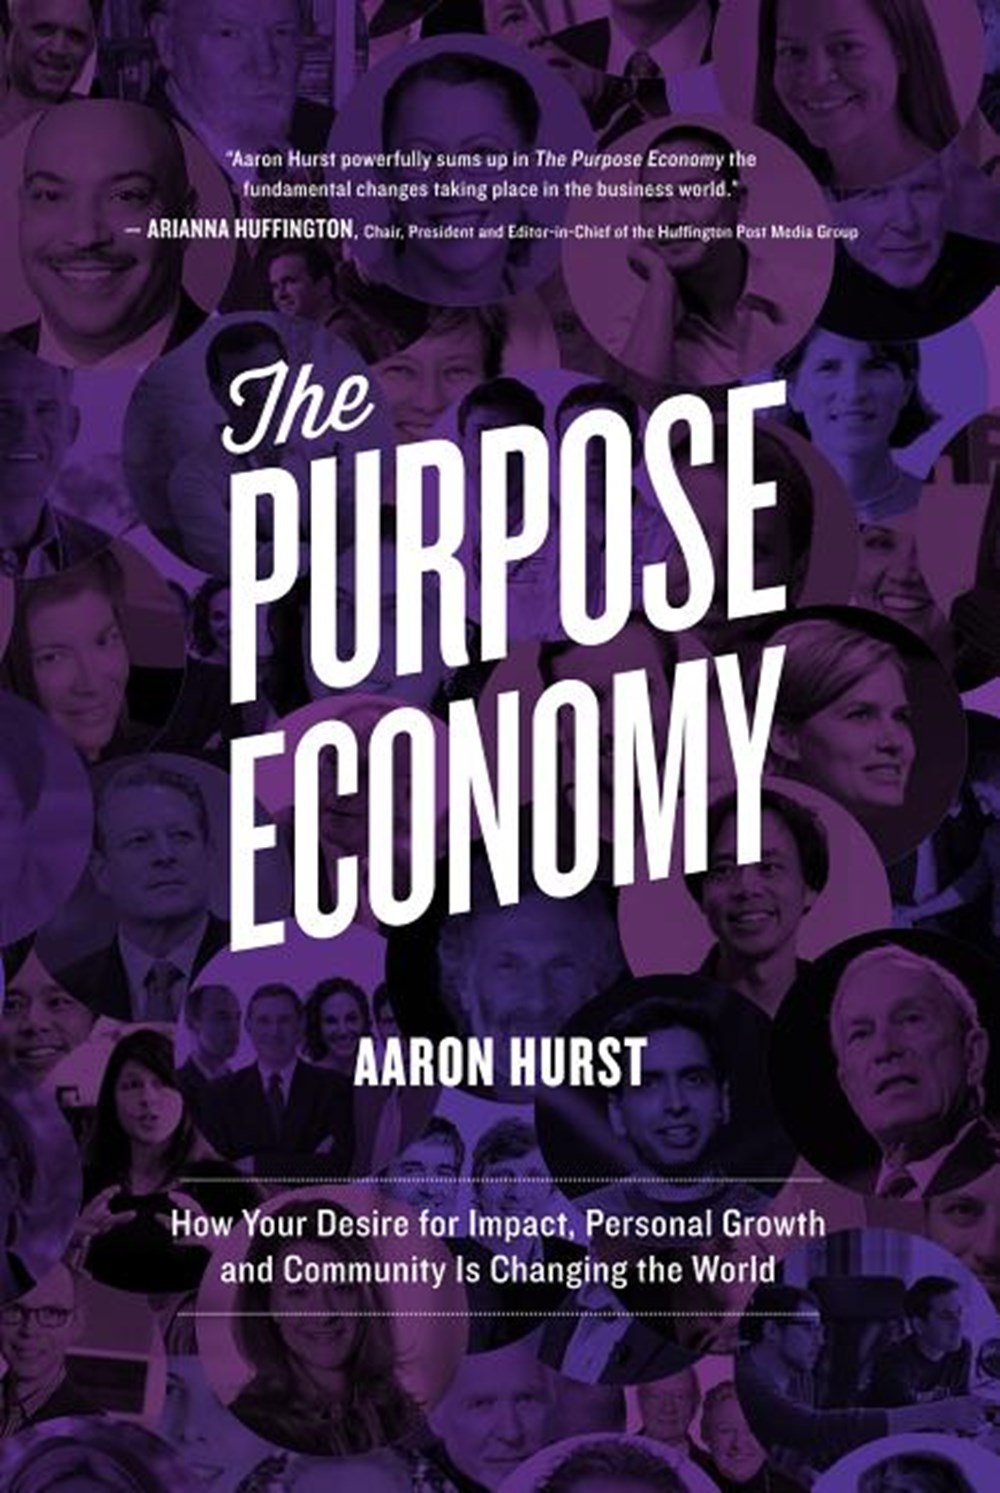 Purpose Economy: How Your Desire for Impact, Personal Growth and Community Is Changing the World